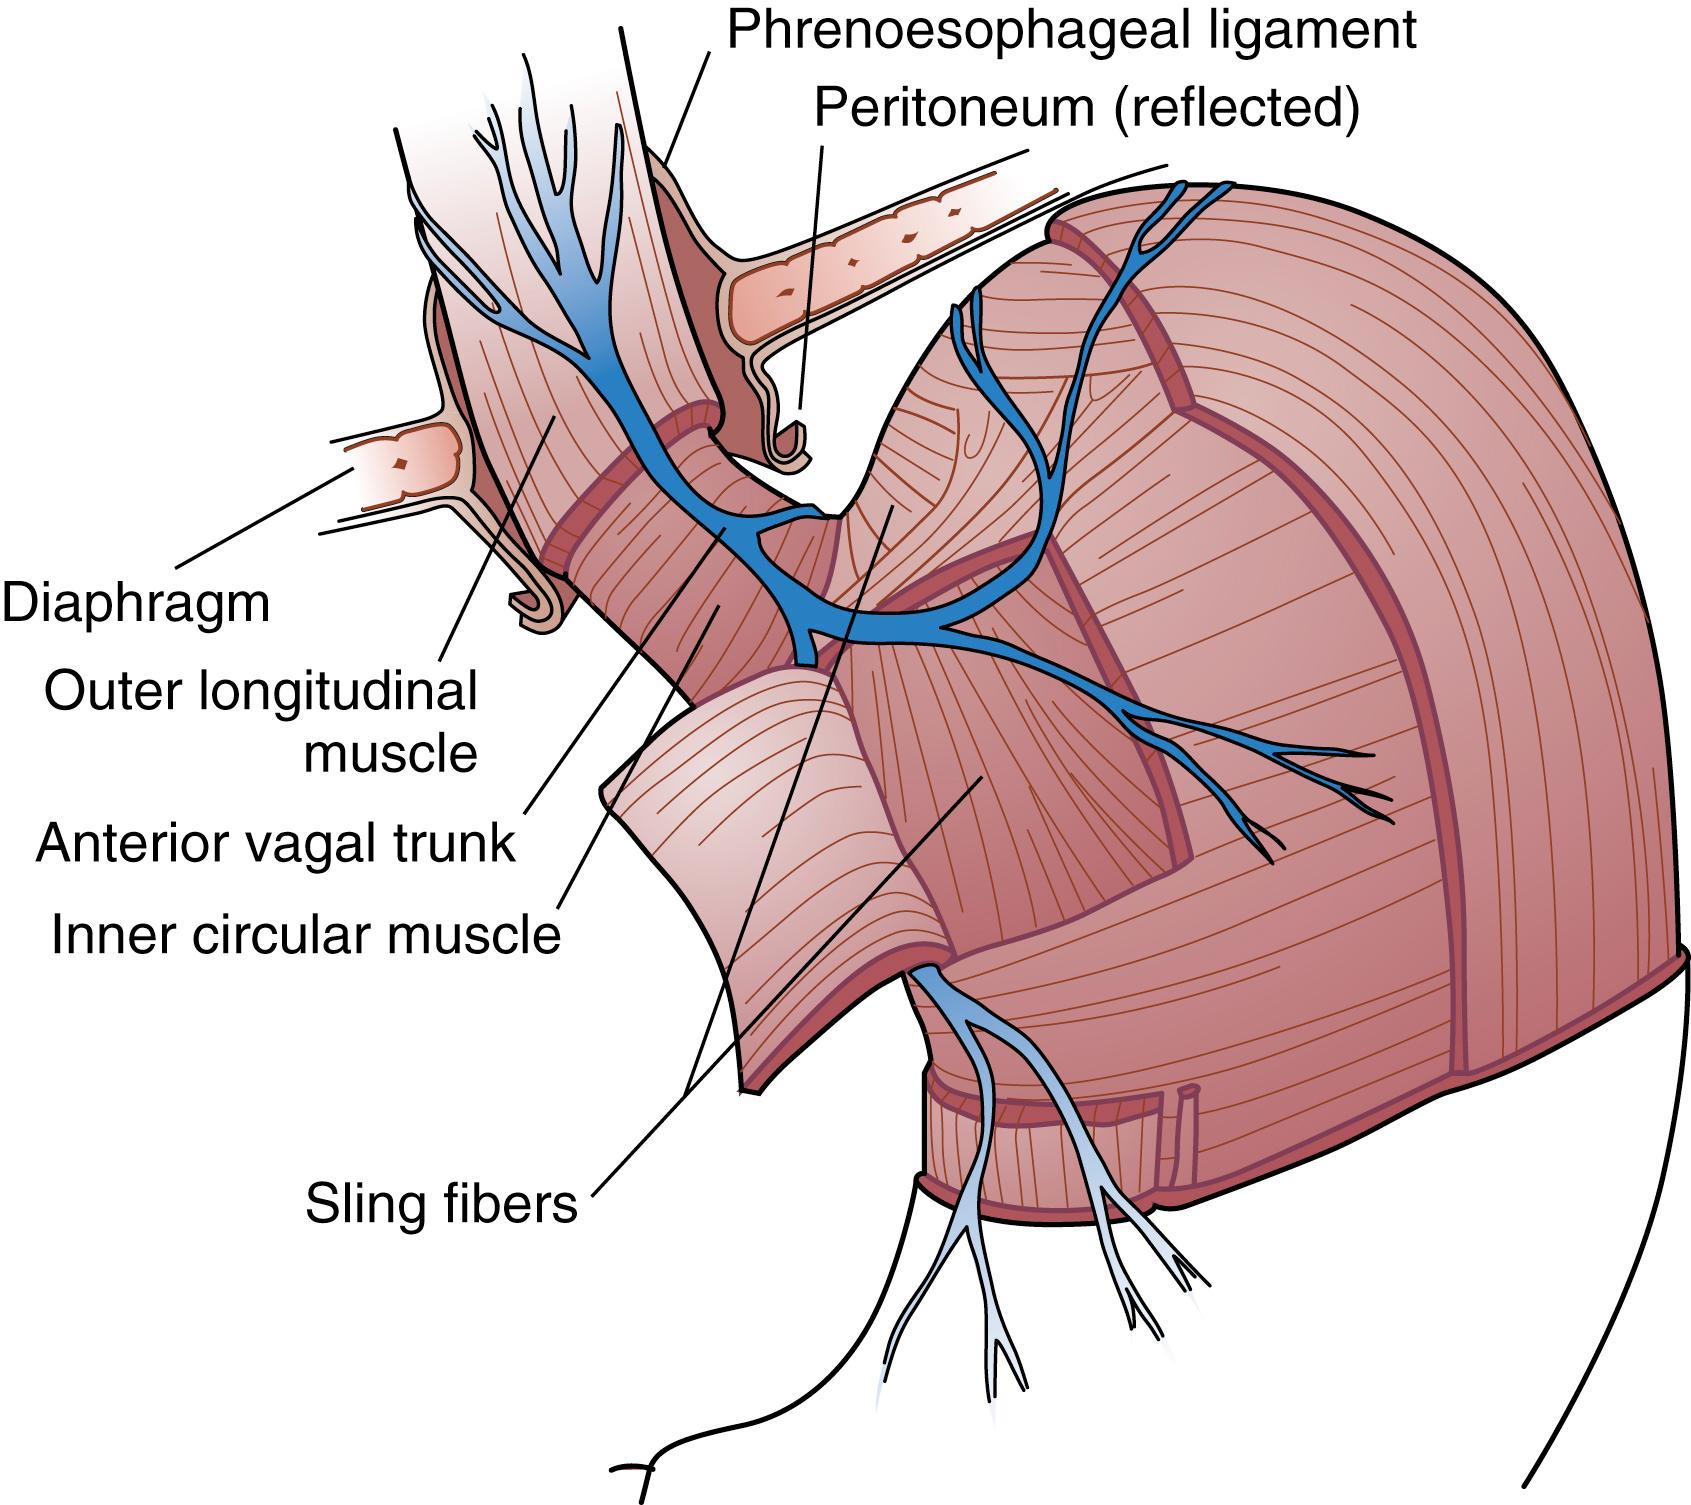 Fig. 43.1, Schematic drawing of the muscle layers at the gastroesophageal junction. The intrinsic muscle of the esophagus, diaphragm, and sling fibers contribute to lower esophageal sphincter pressure. The circular muscle fibers of the esophagus are at the same depth as the sling fibers of the cardia.